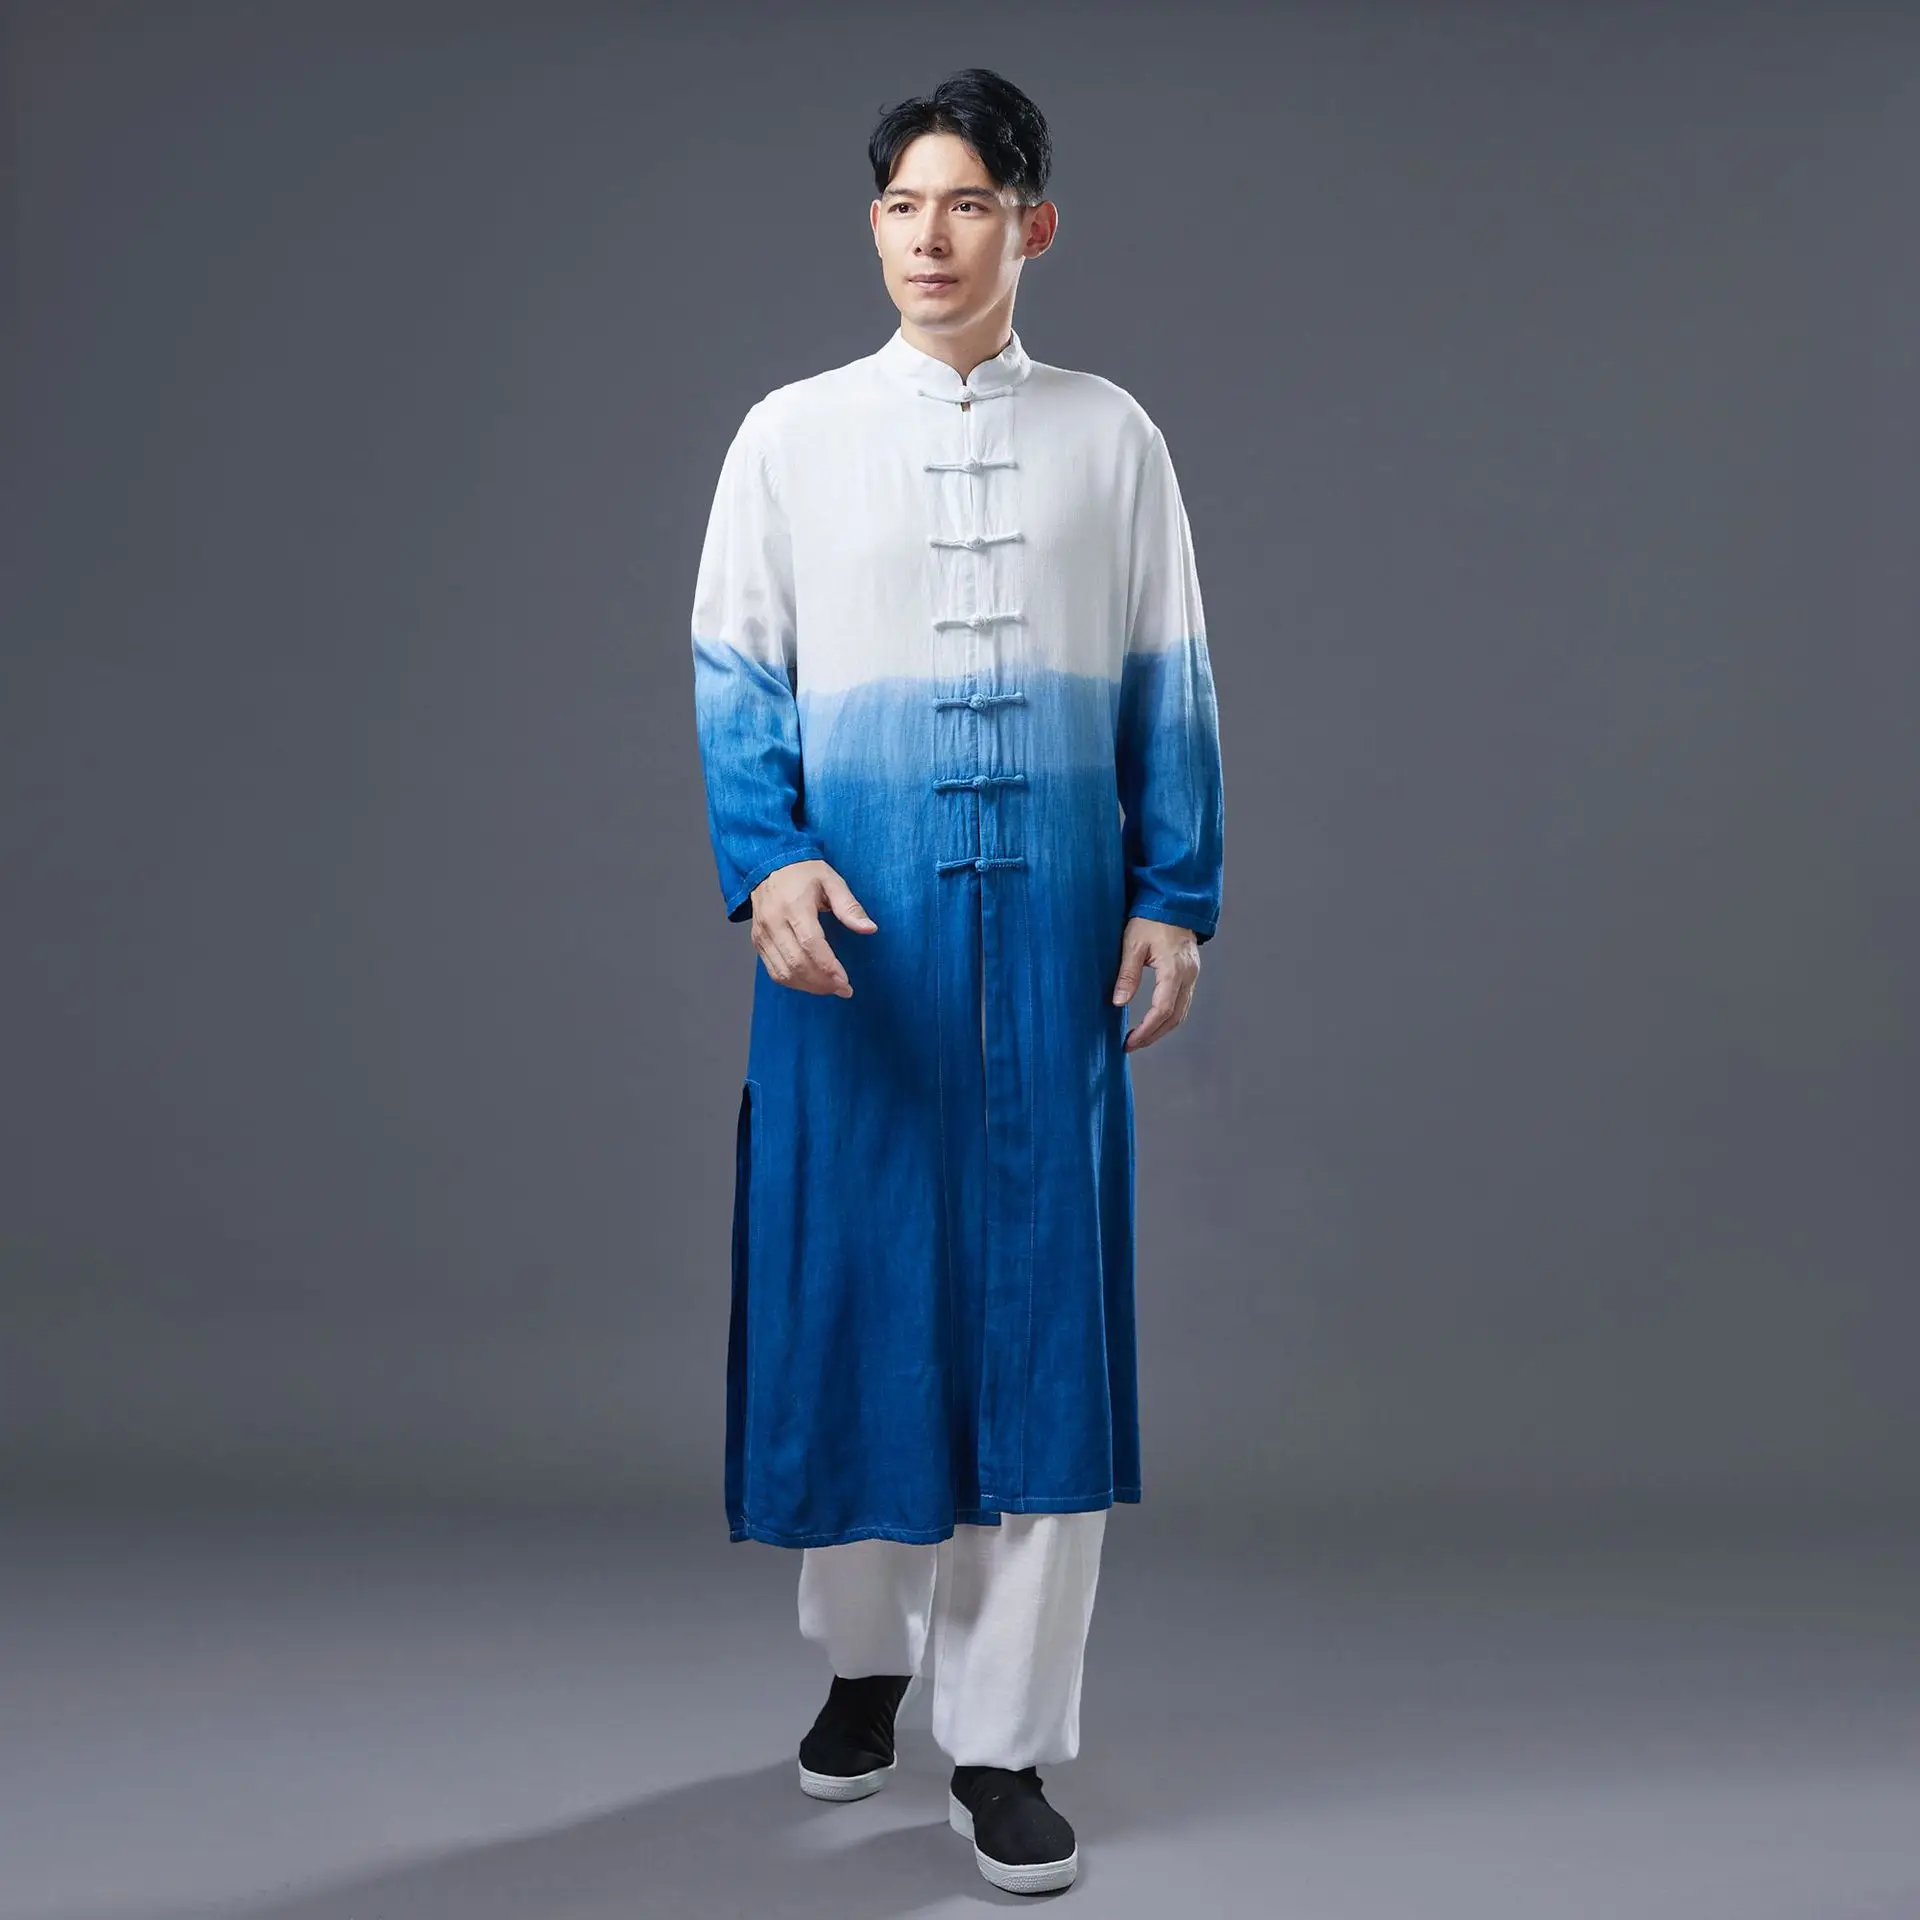 Chinese Traditional Trench Coat Men Loose Cotton Linen Stand-up Collar Robe Gradually Discoloration Vintage Kung Fu Clothing